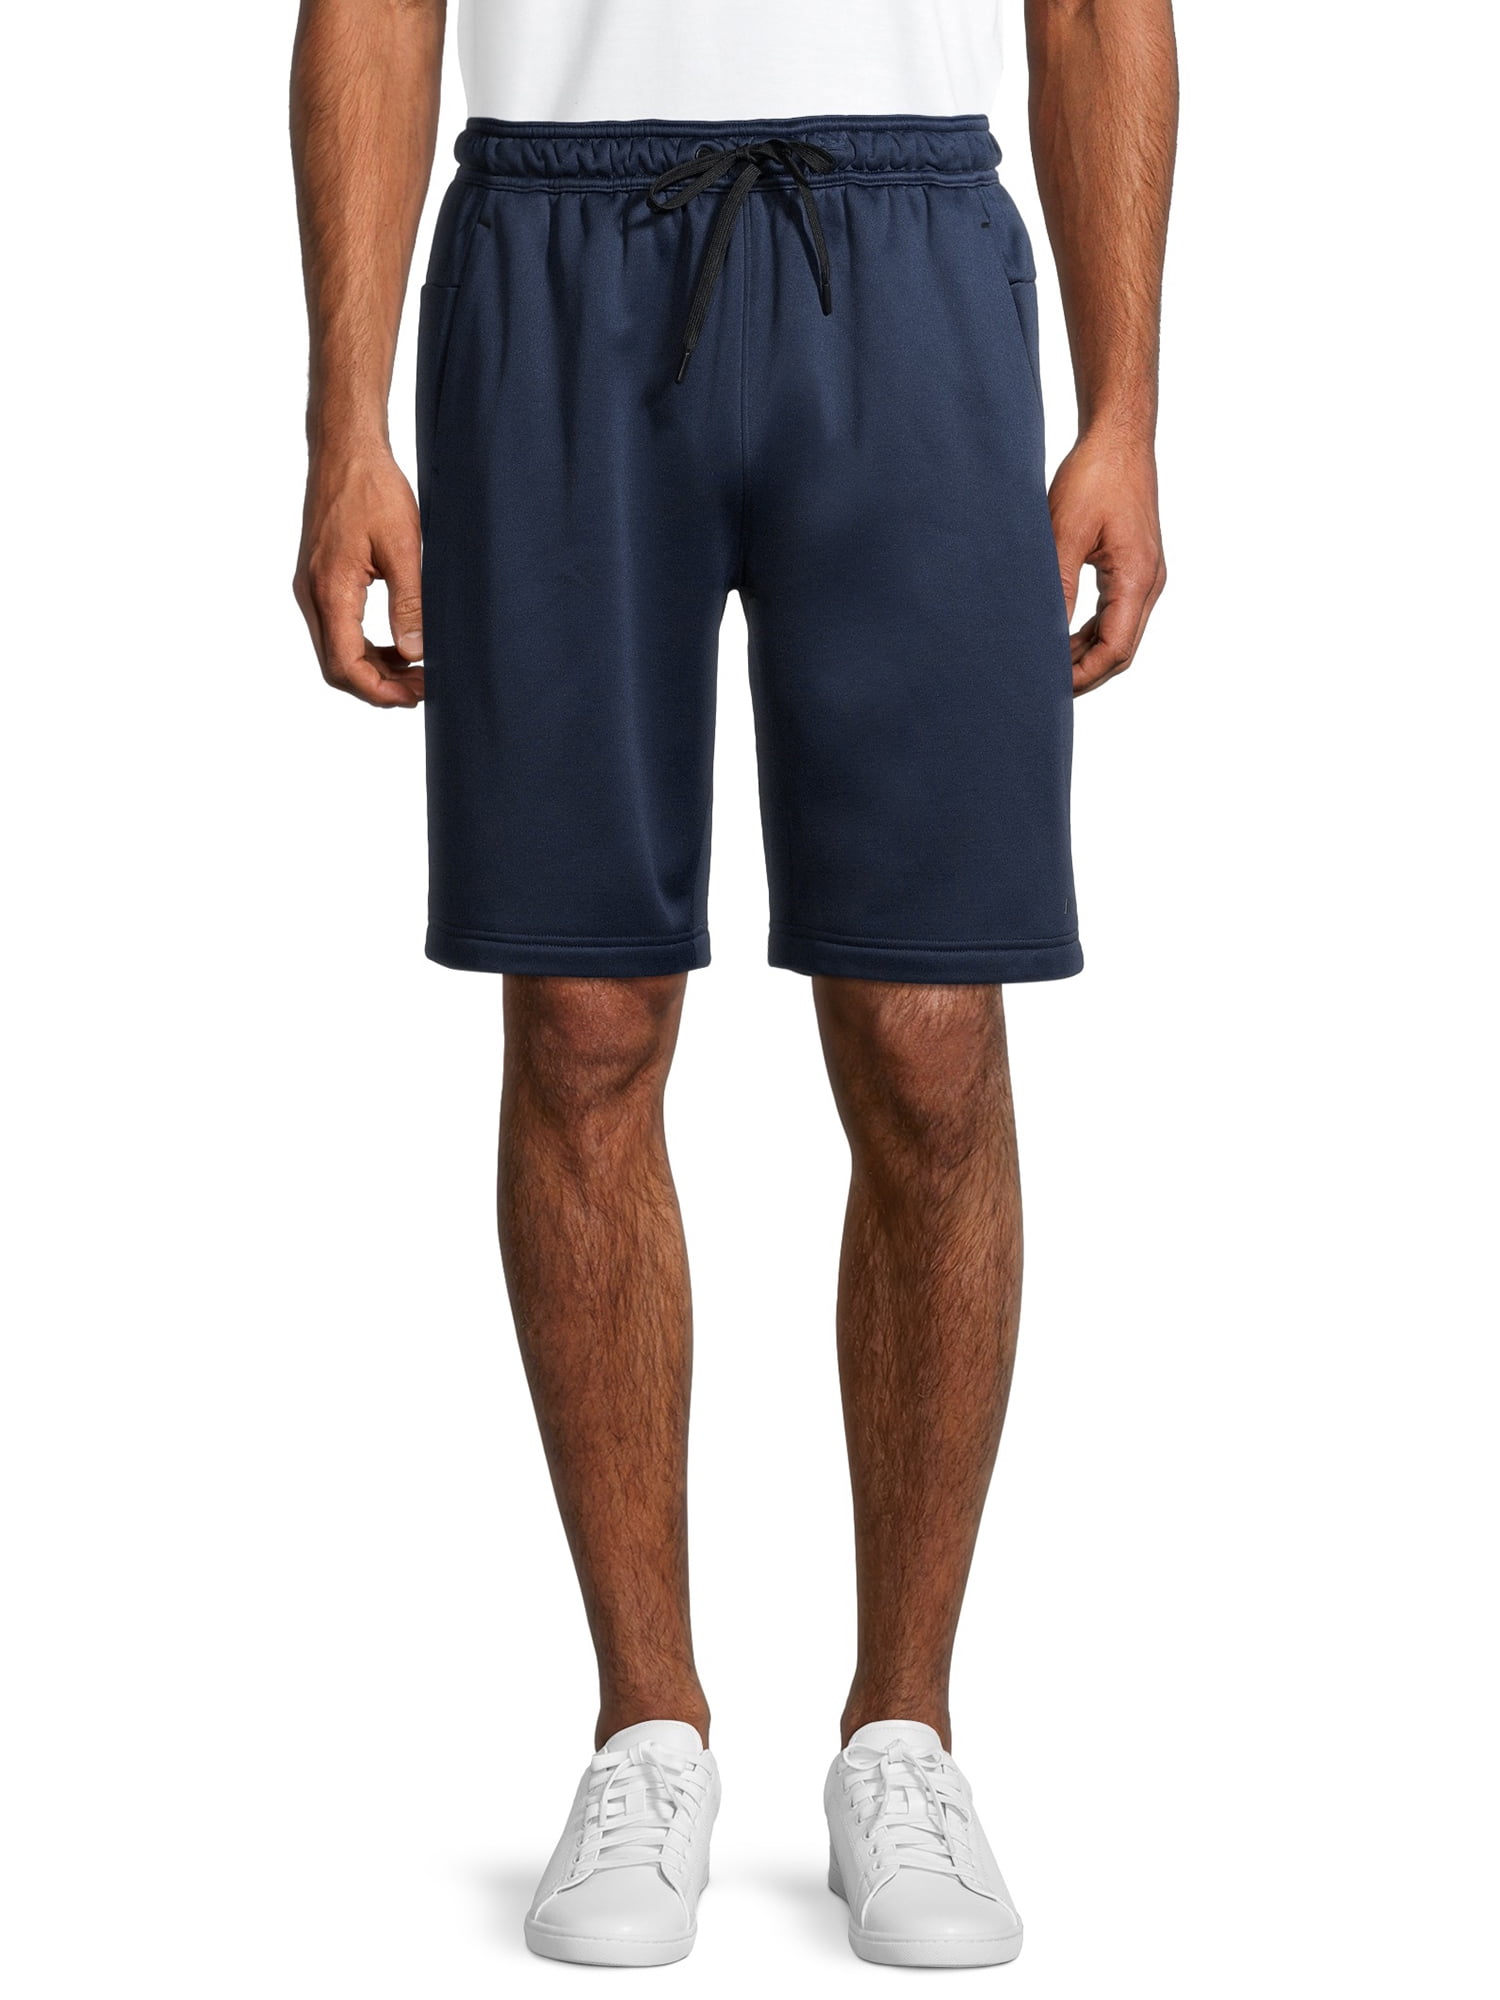 Russell Men's and Big Men's Active Tech Fleece Short, up to Size 5XL ...